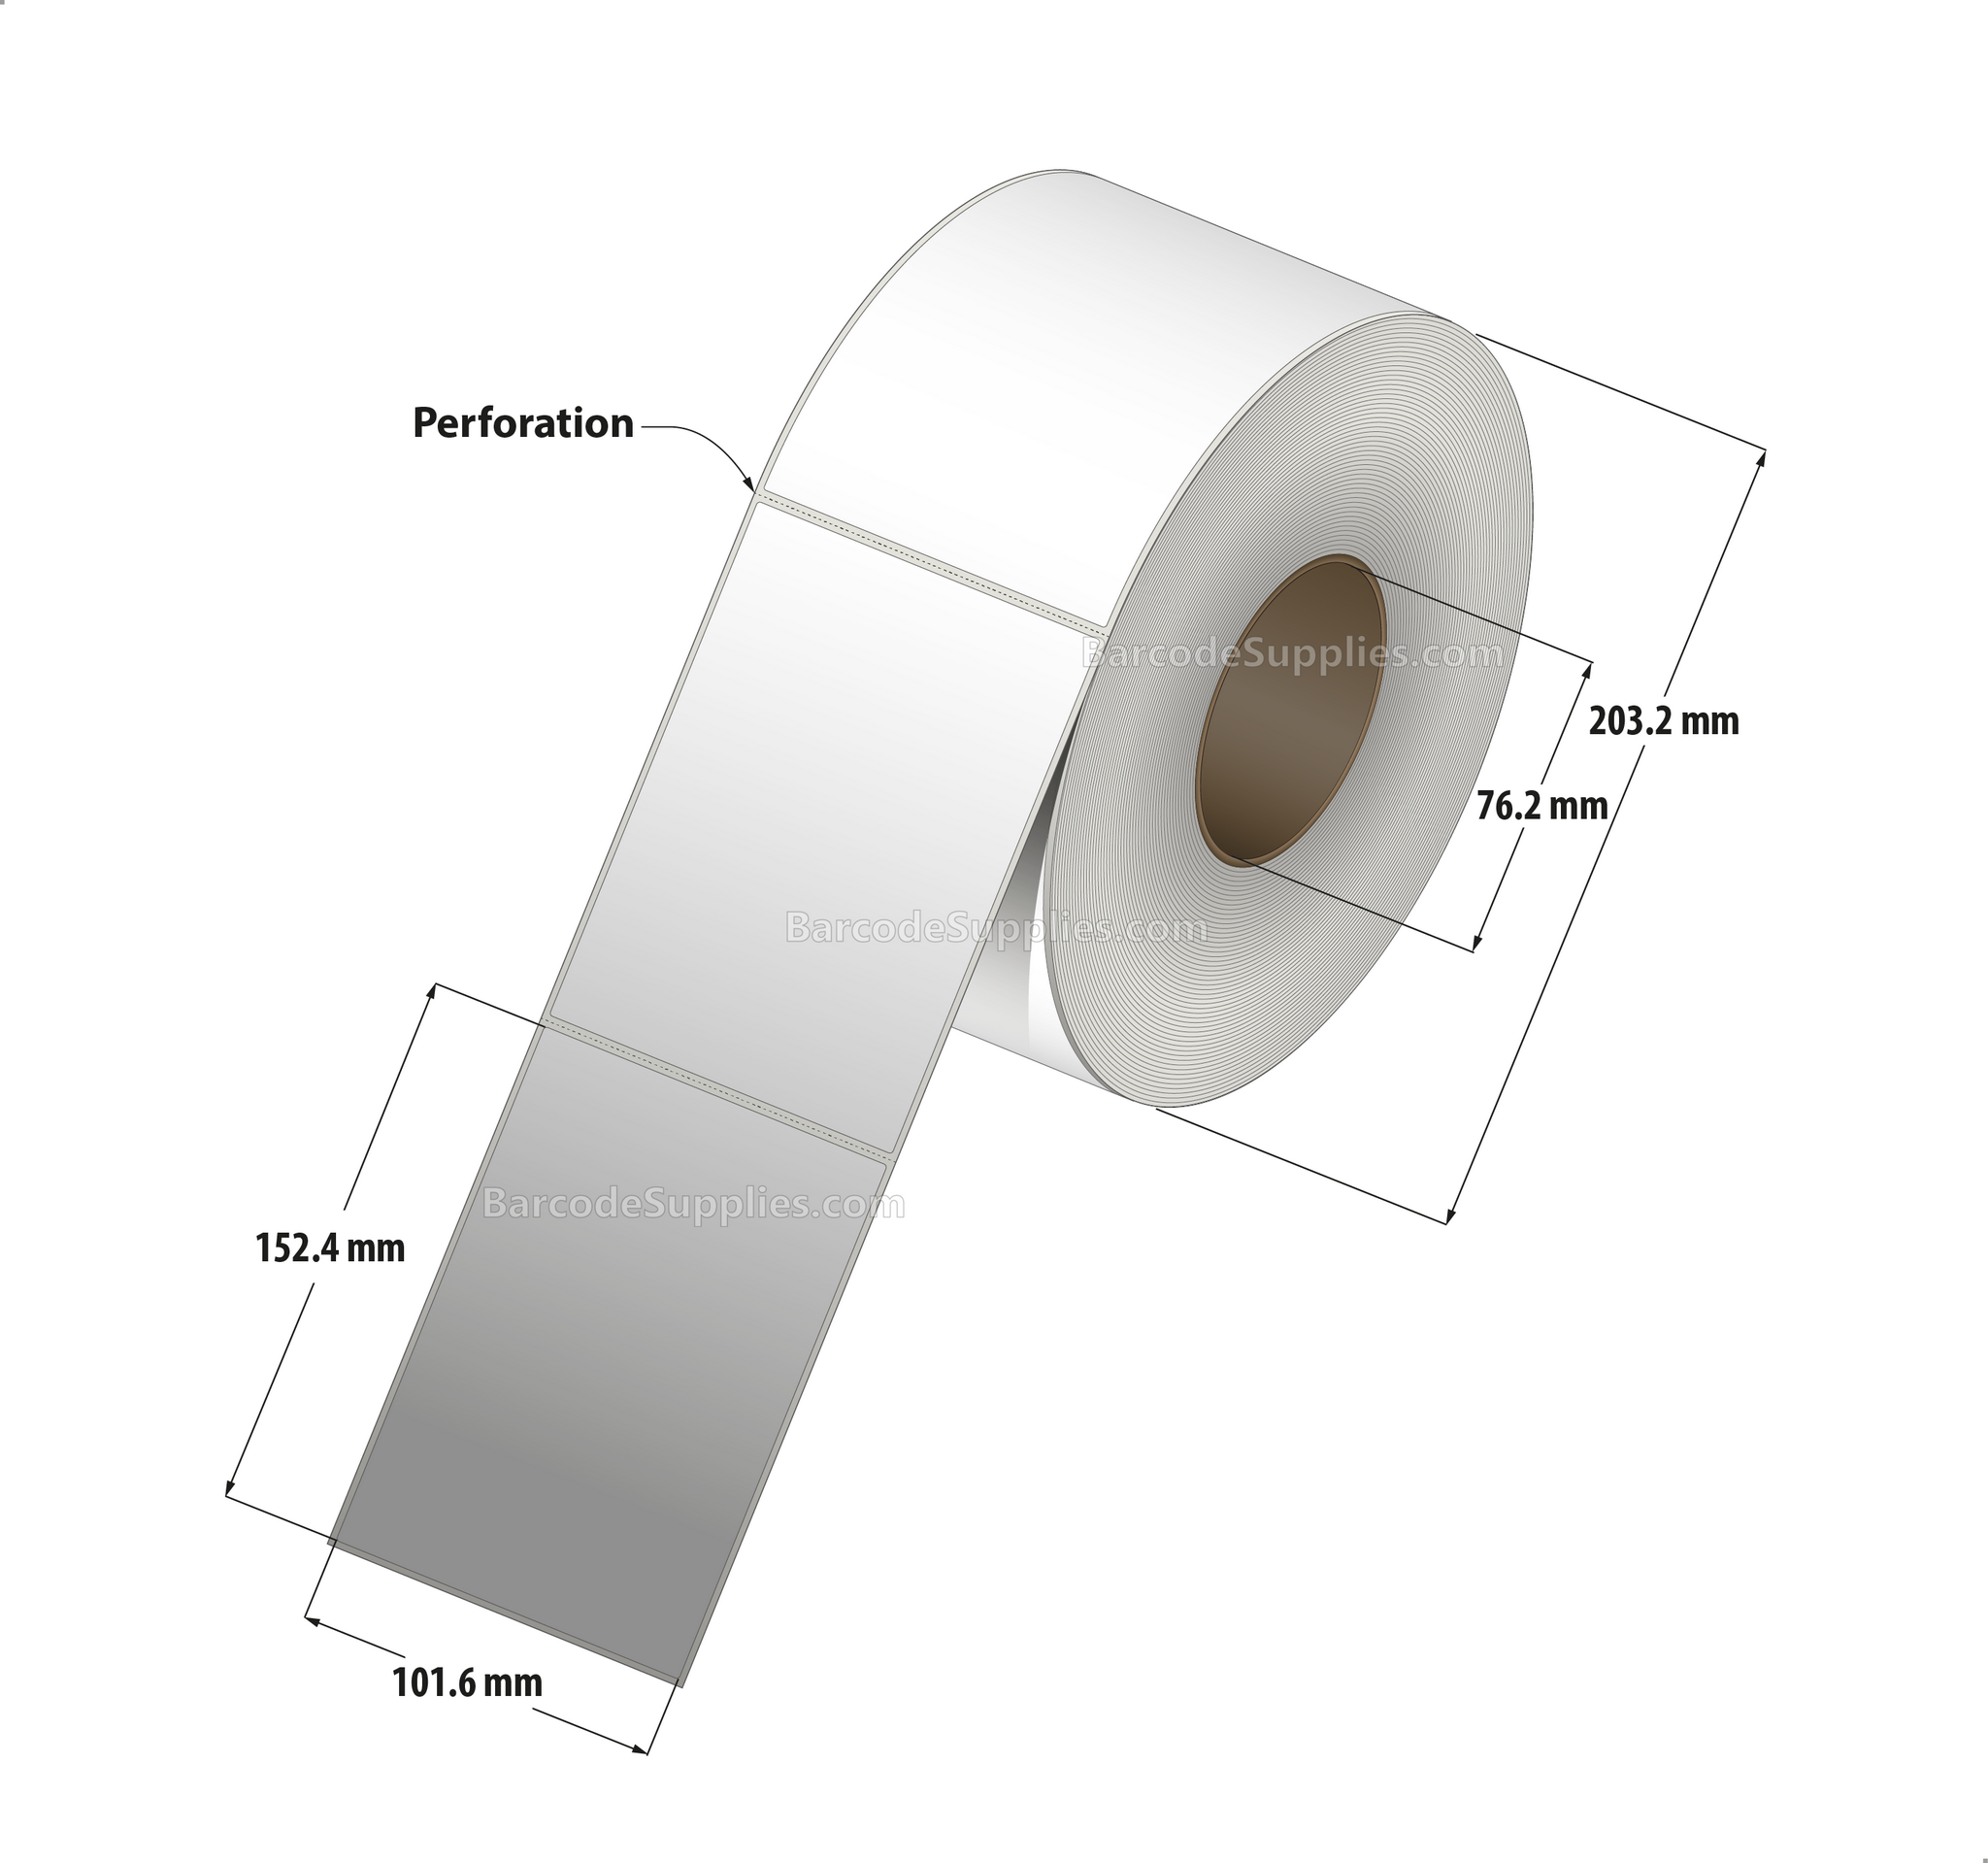 4 x 6 Thermal Transfer White Labels With Permanent Adhesive - Perforated - 950 Labels Per Roll - Carton Of 4 Rolls - 3800 Labels Total - MPN: RSP-4-6-950-3